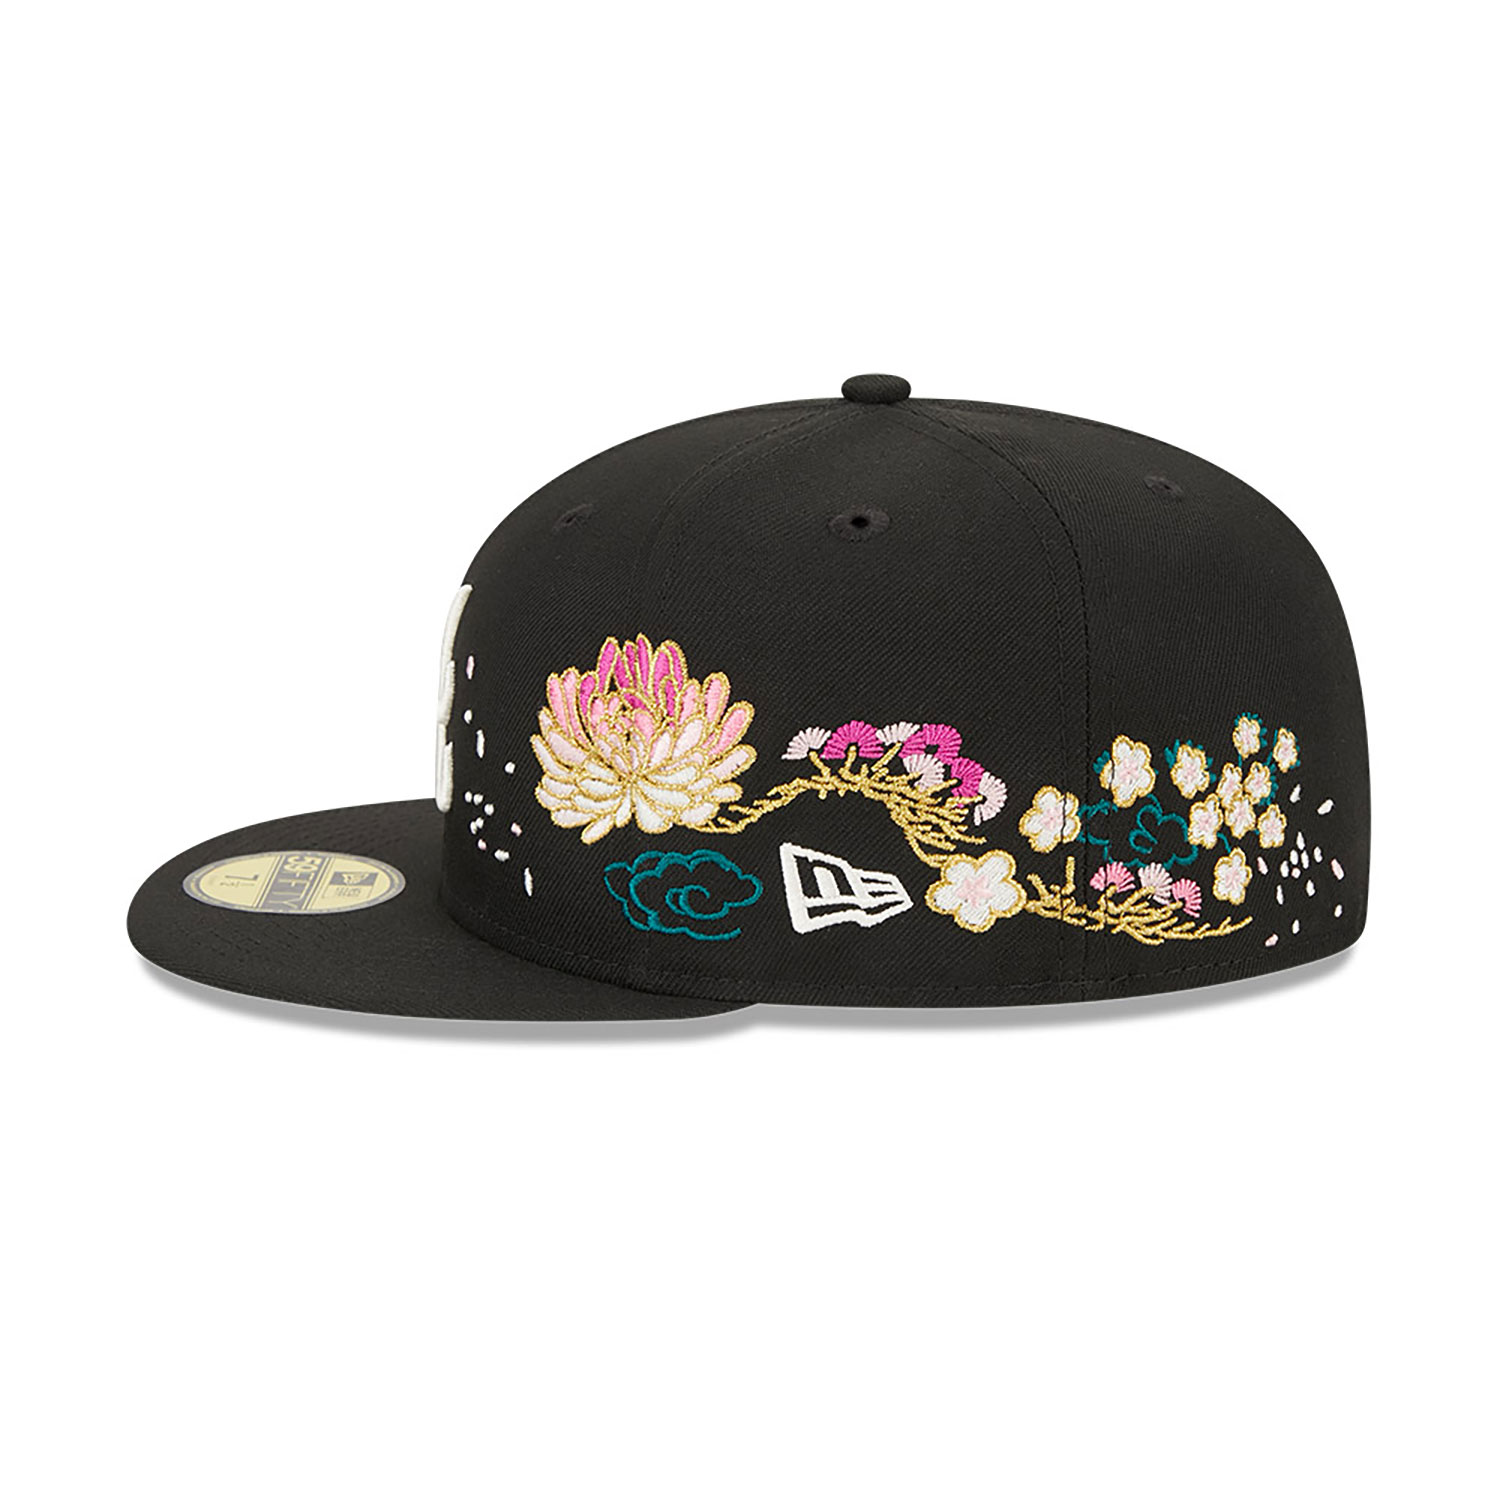 Atlanta Braves Cherry Blossom Black 59FIFTY Fitted Cap